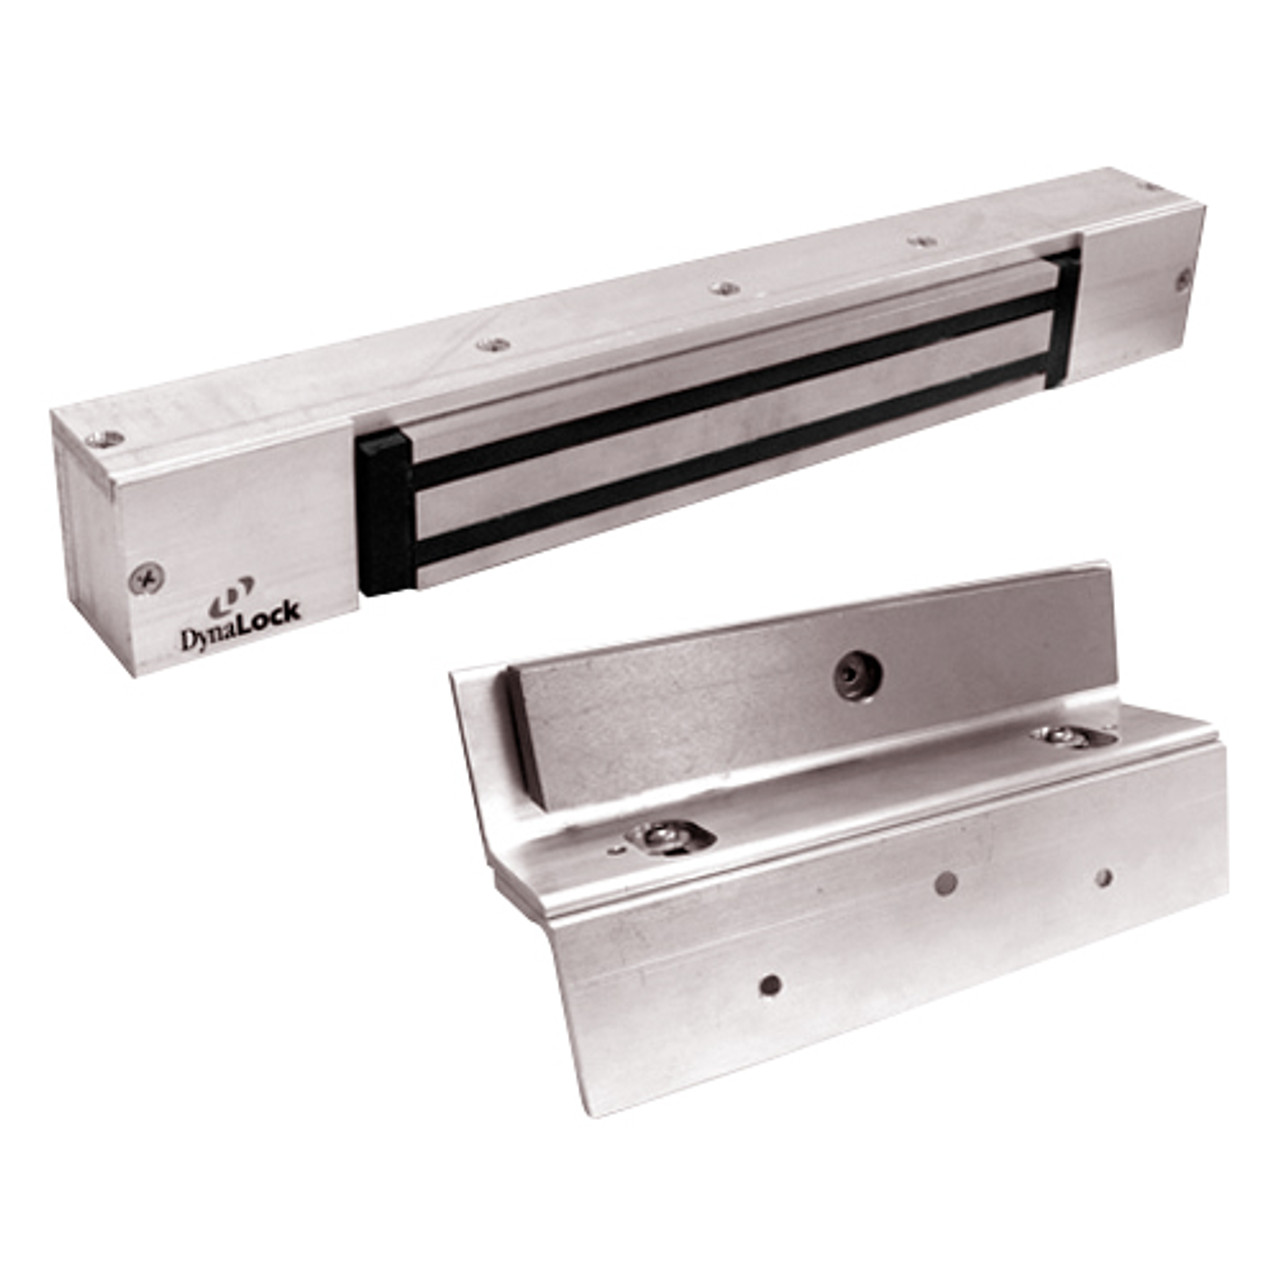 2268-TJ10-US28-ATS DynaLock 2268 Series Single Classic Low Profile Electromagnetic Lock for Inswing Door with ATS in Satin Aluminum